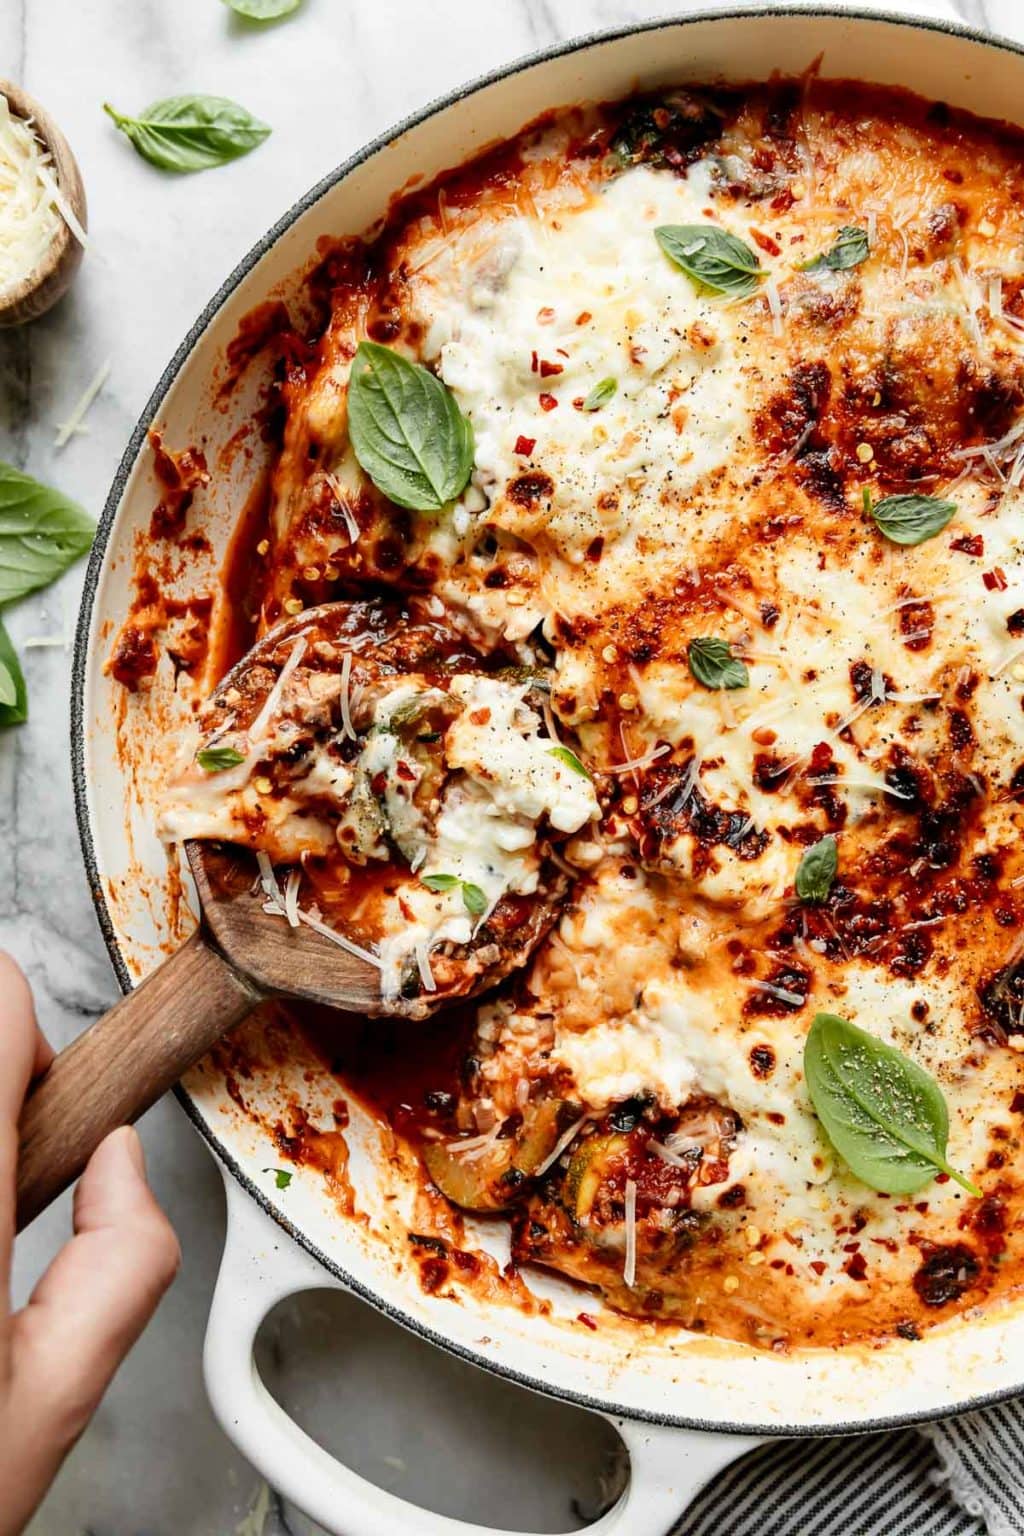 Easy One-Skillet Zucchini Lasagna - The Real Food Dietitians